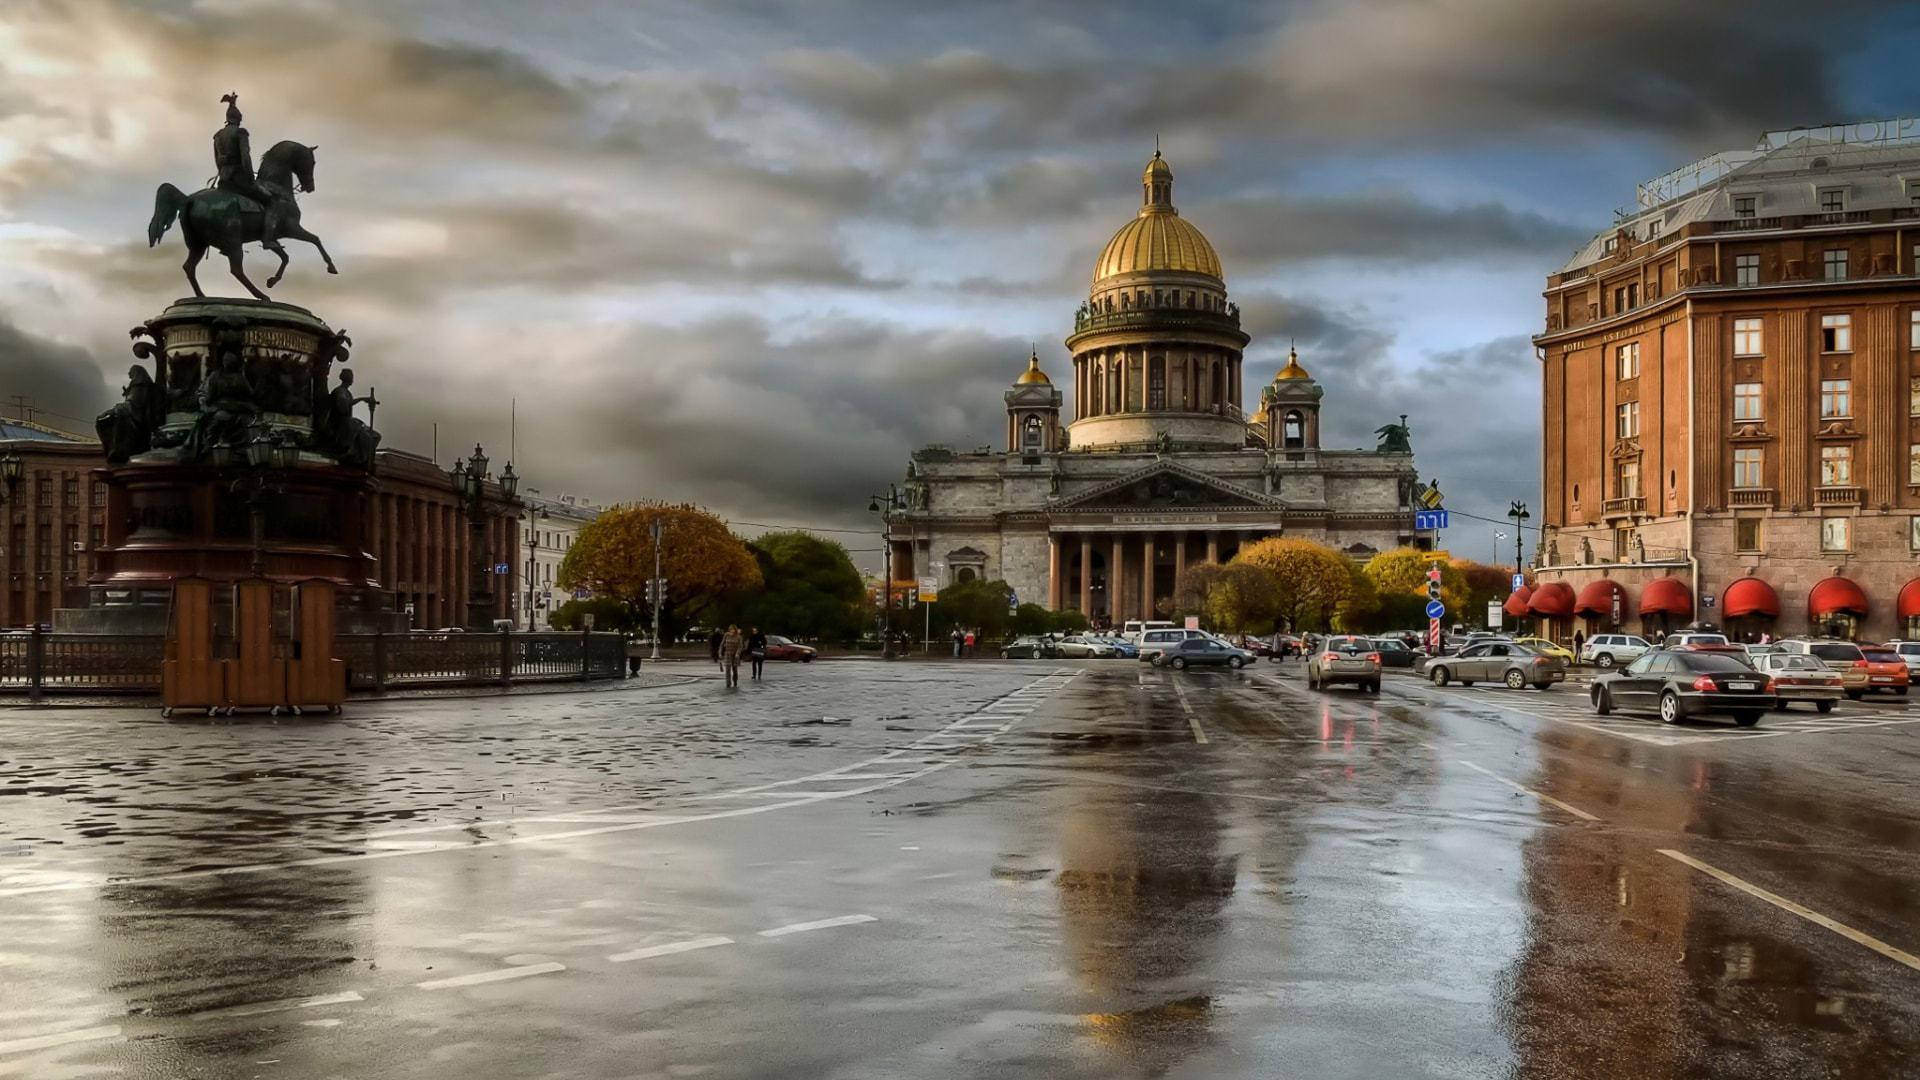 Saint Petersburg In A Stormy Weather Background